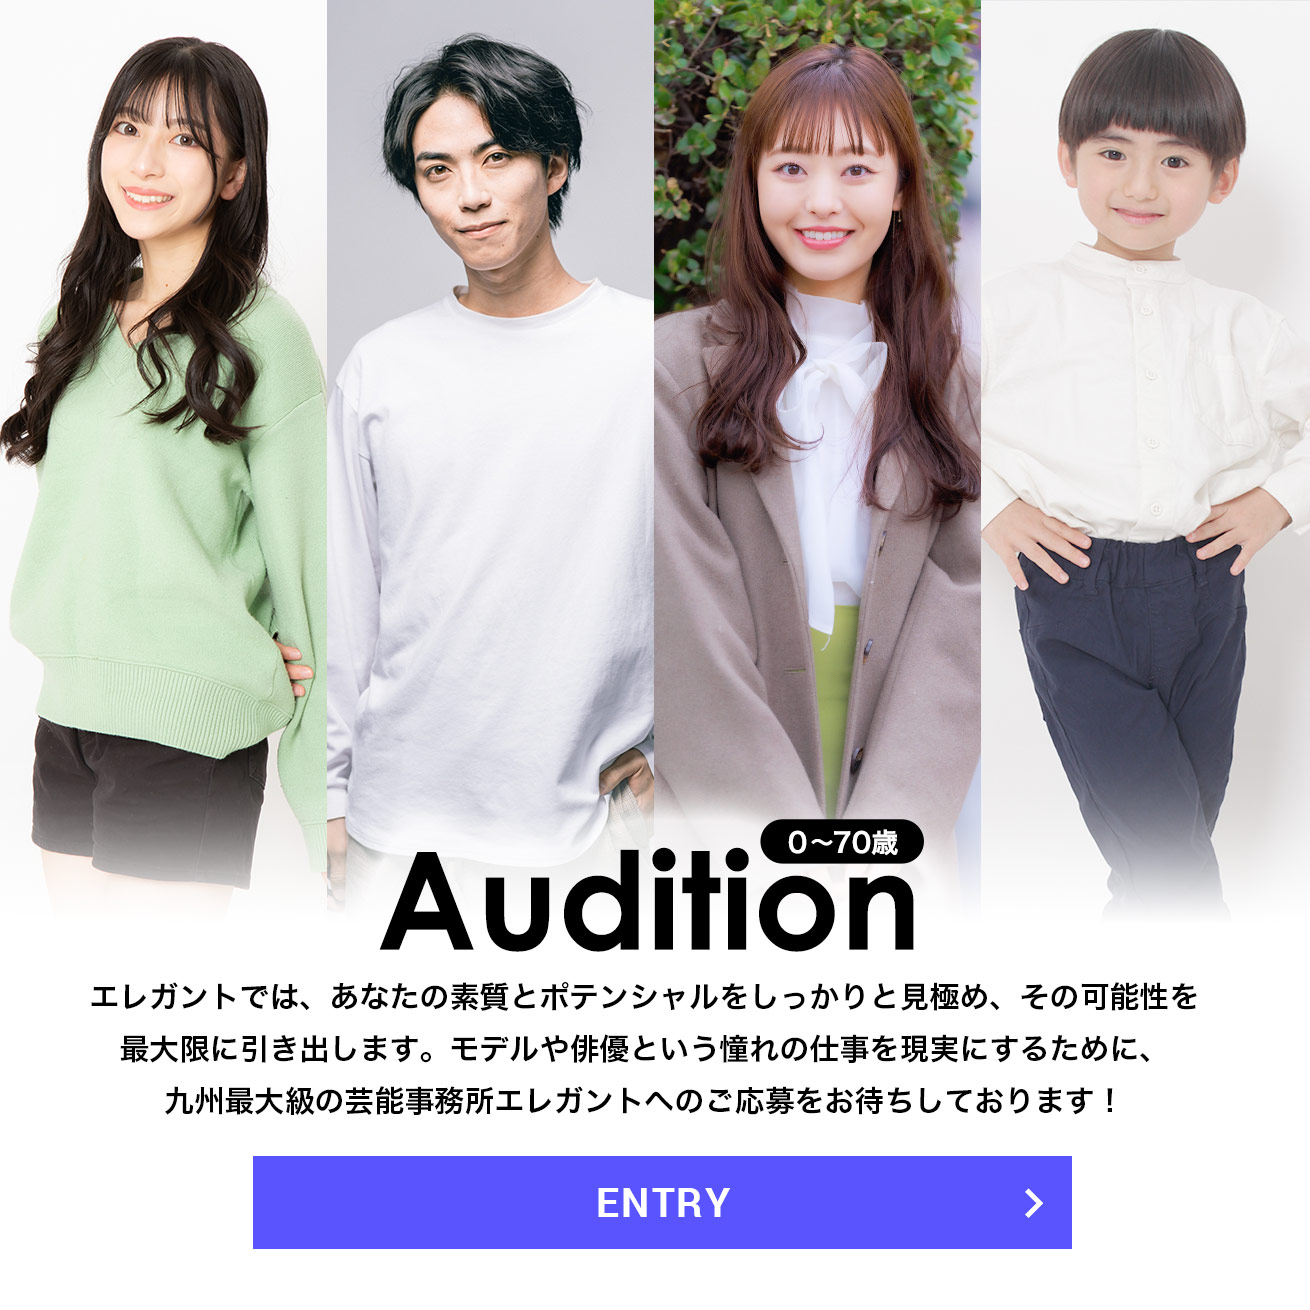 Audition 0〜70歳